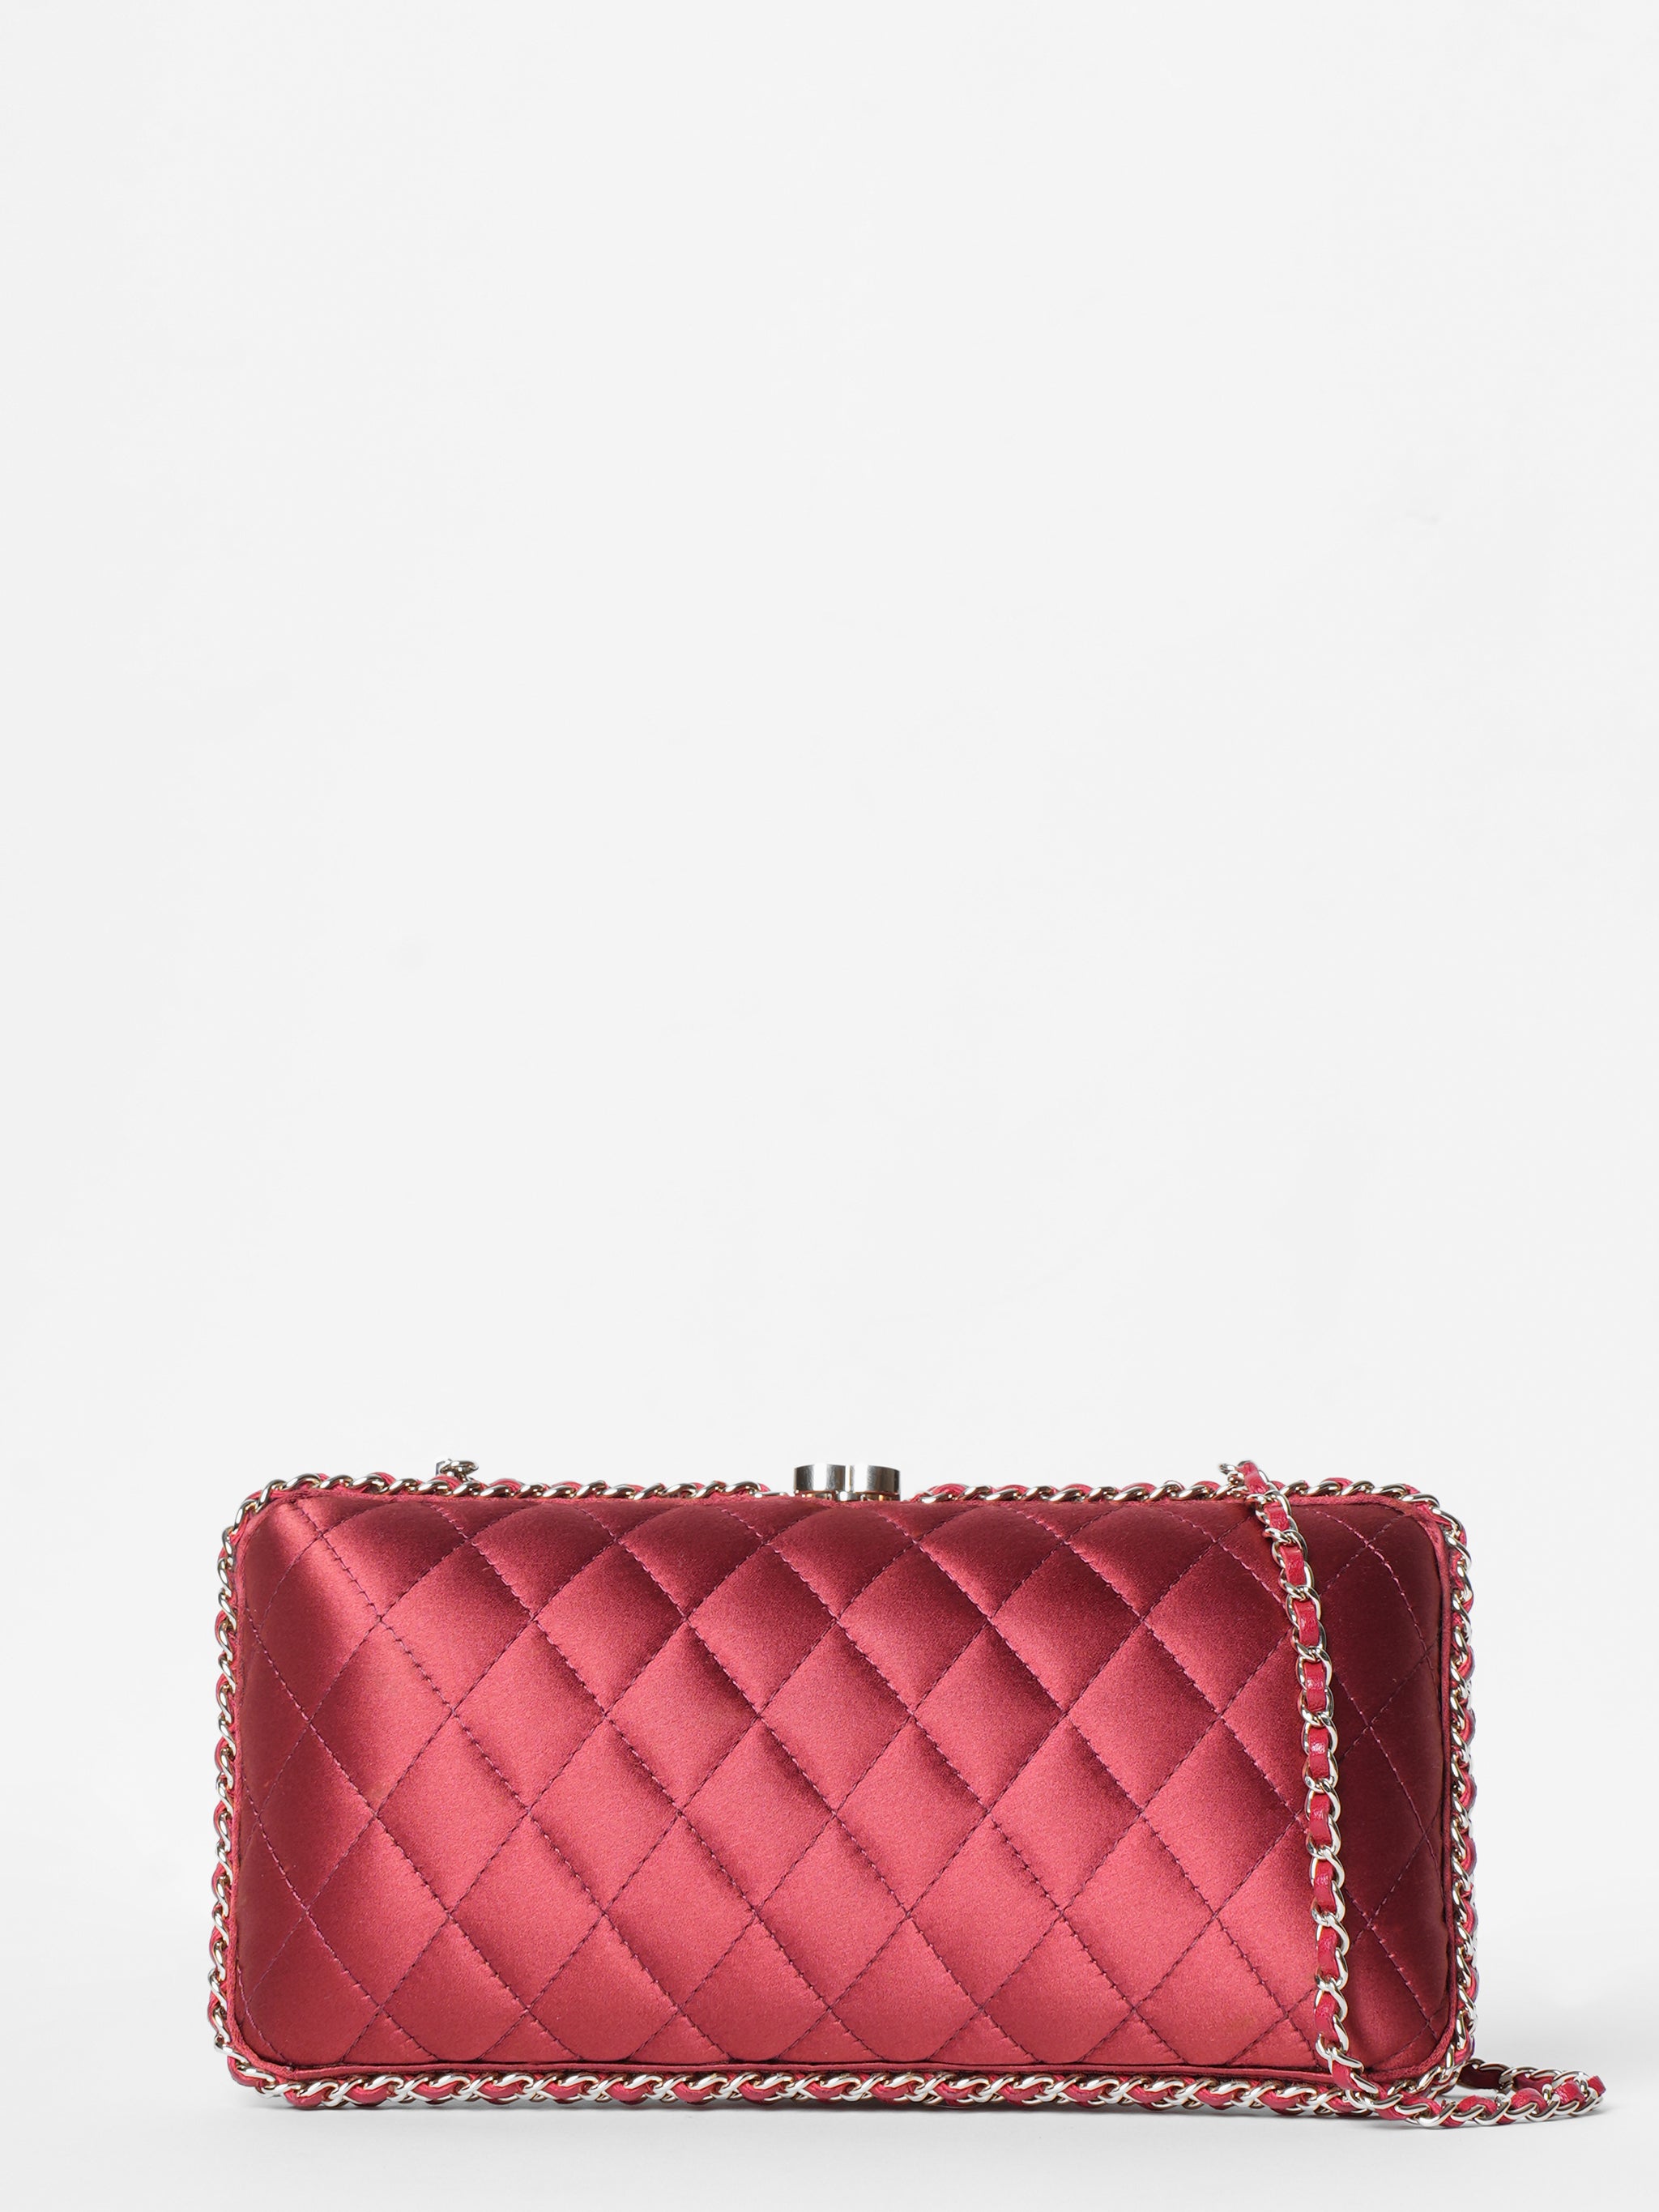 Vintage Chanel Red Quilted Clutch